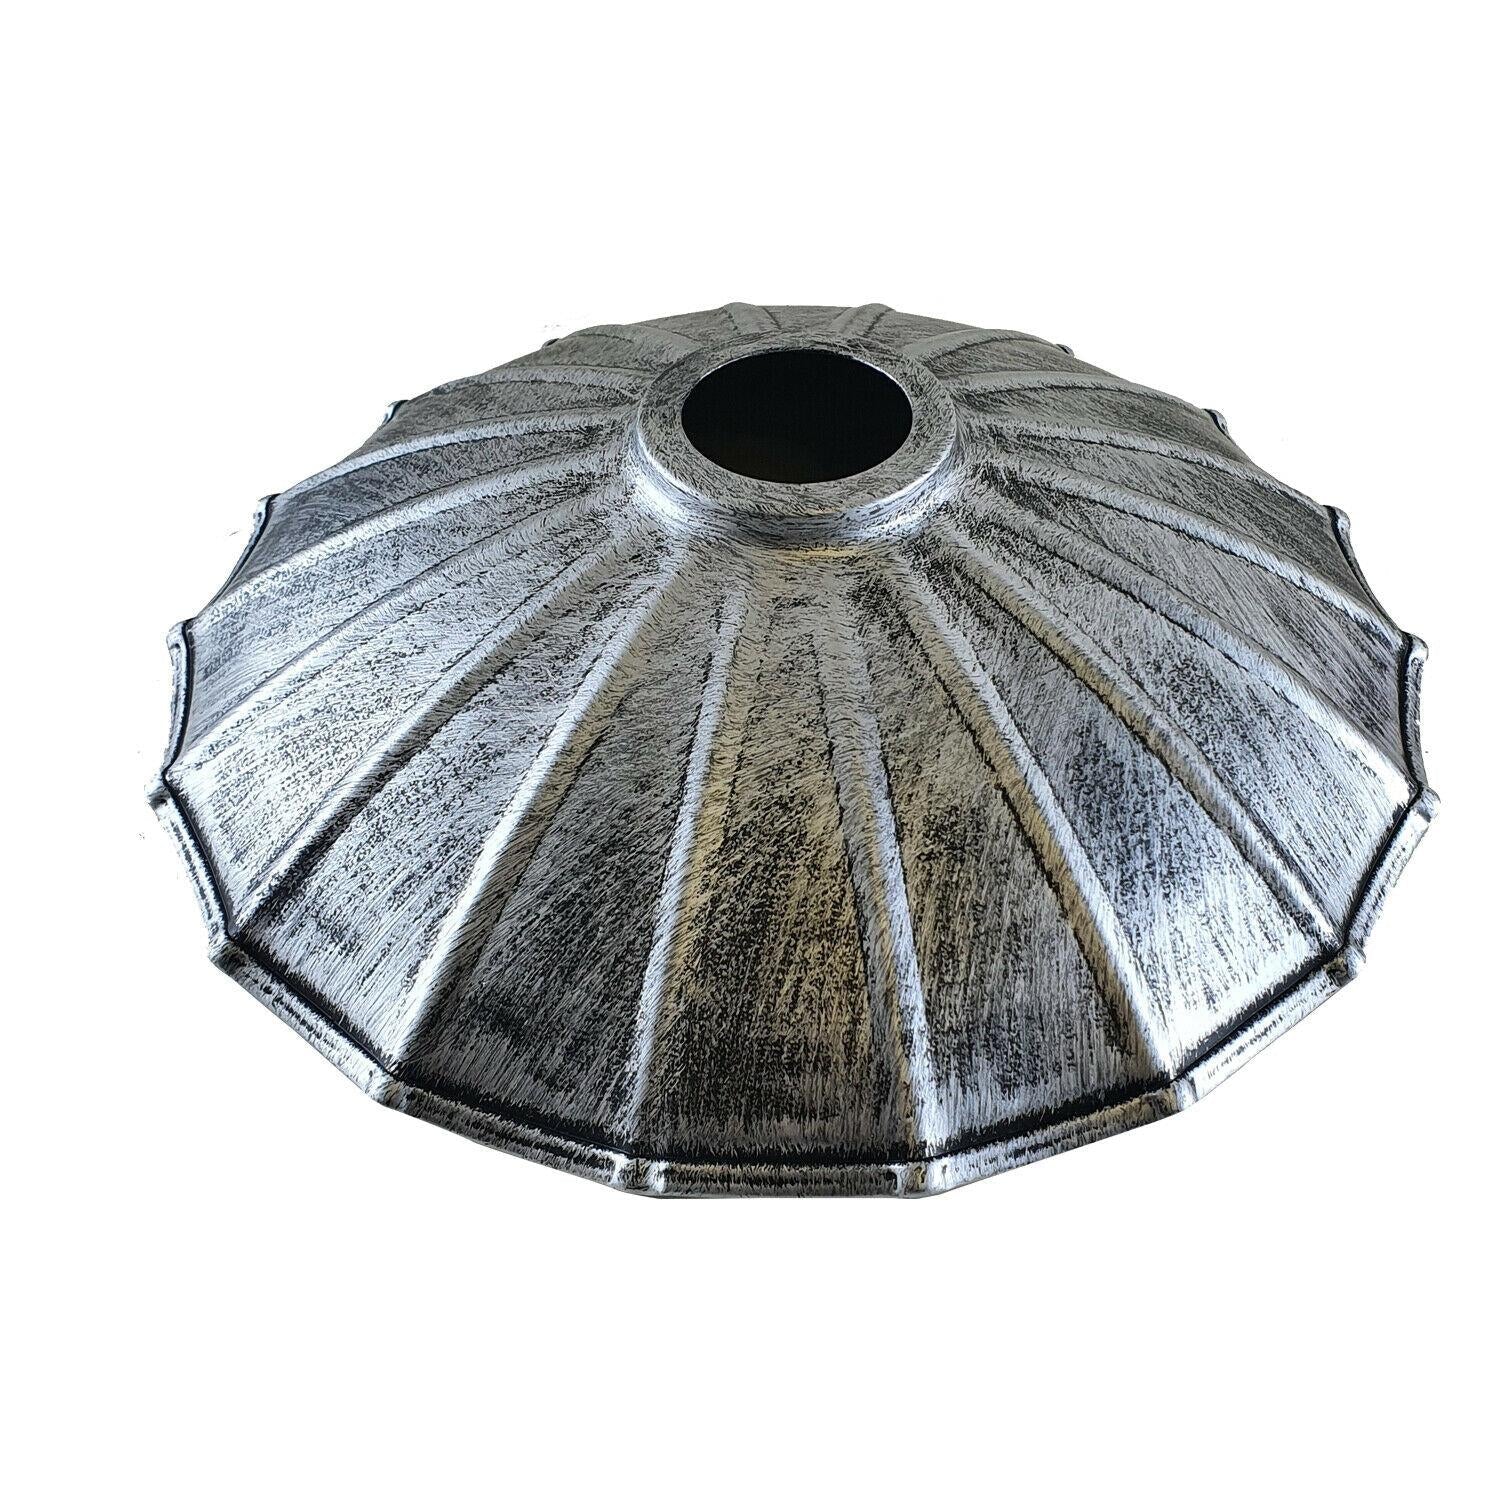  Industrial Wavy Shade Rustic Lampshade Ceiling Pendant Light